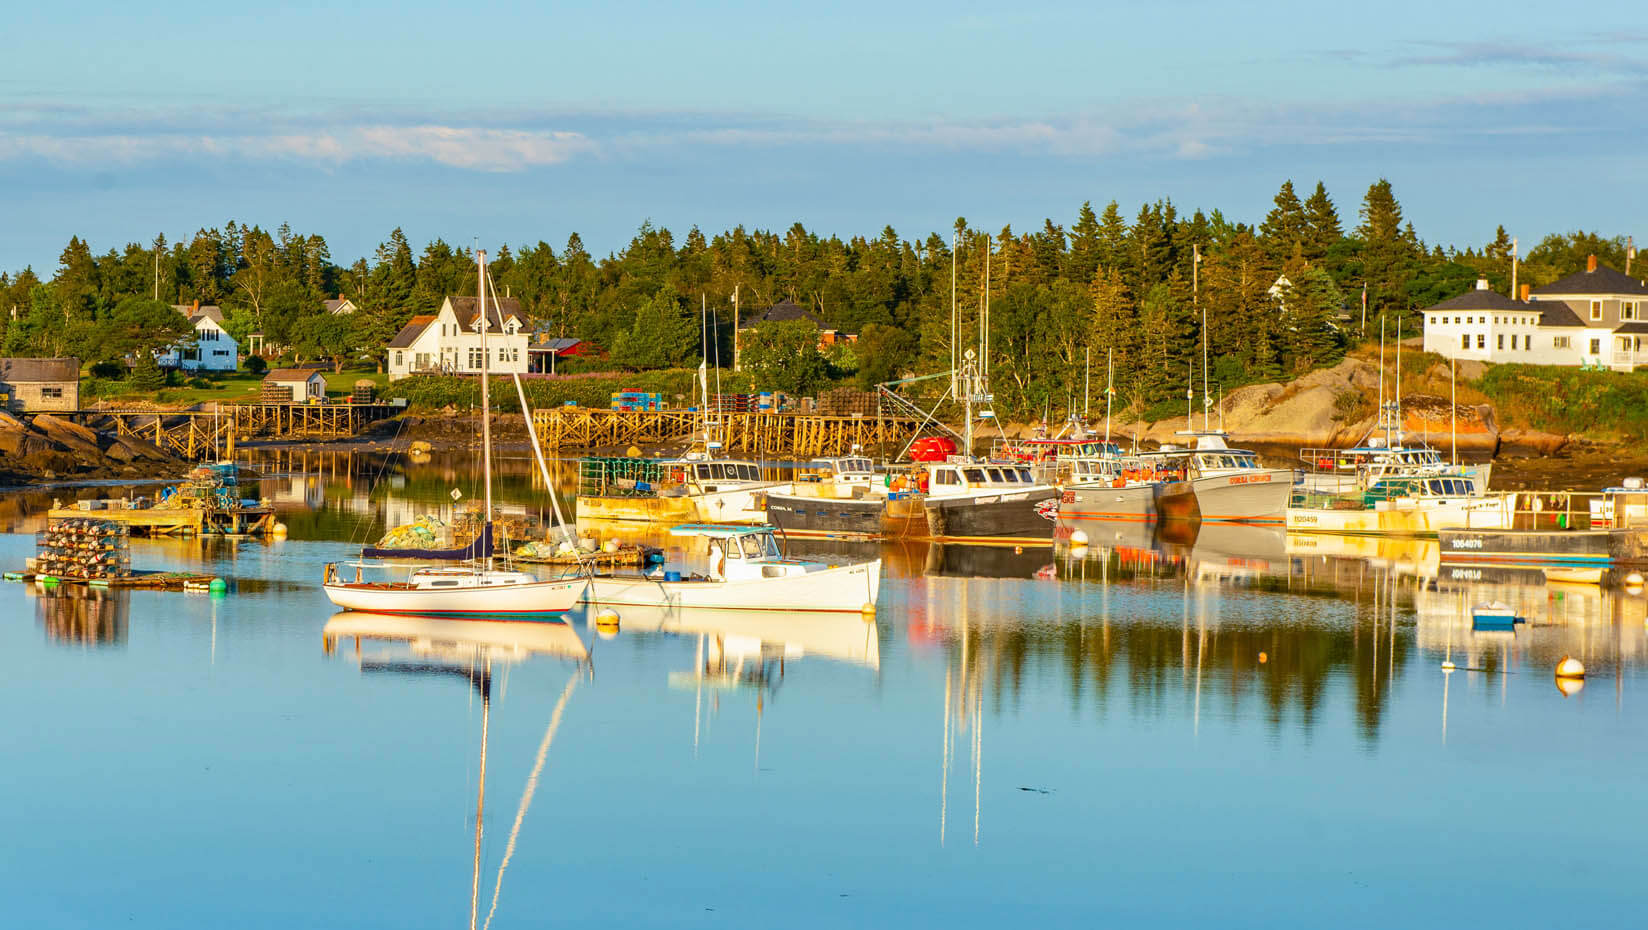 Image of lobster boats at a working waterfront in Maine